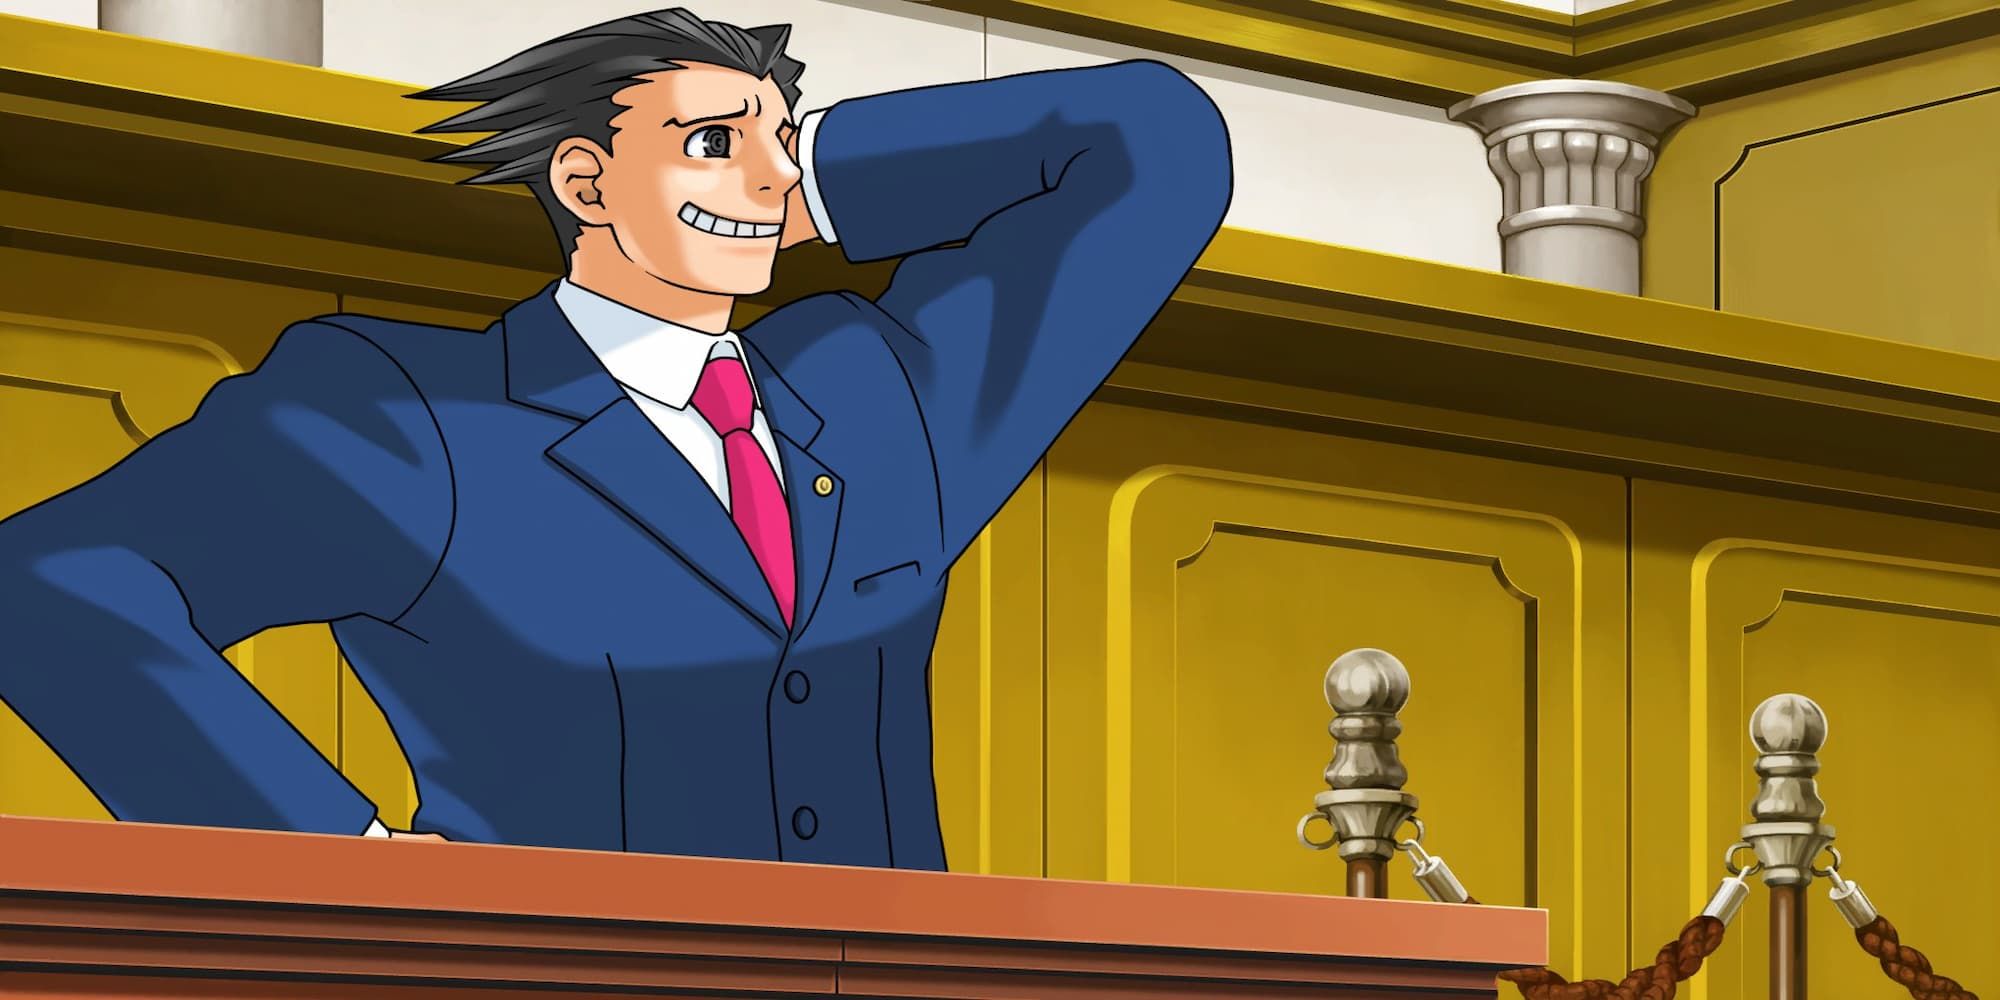 Ace Attorney Phoenix standing in courtroom staring to side with had behind head sheepish look wearing blue suit and red tie